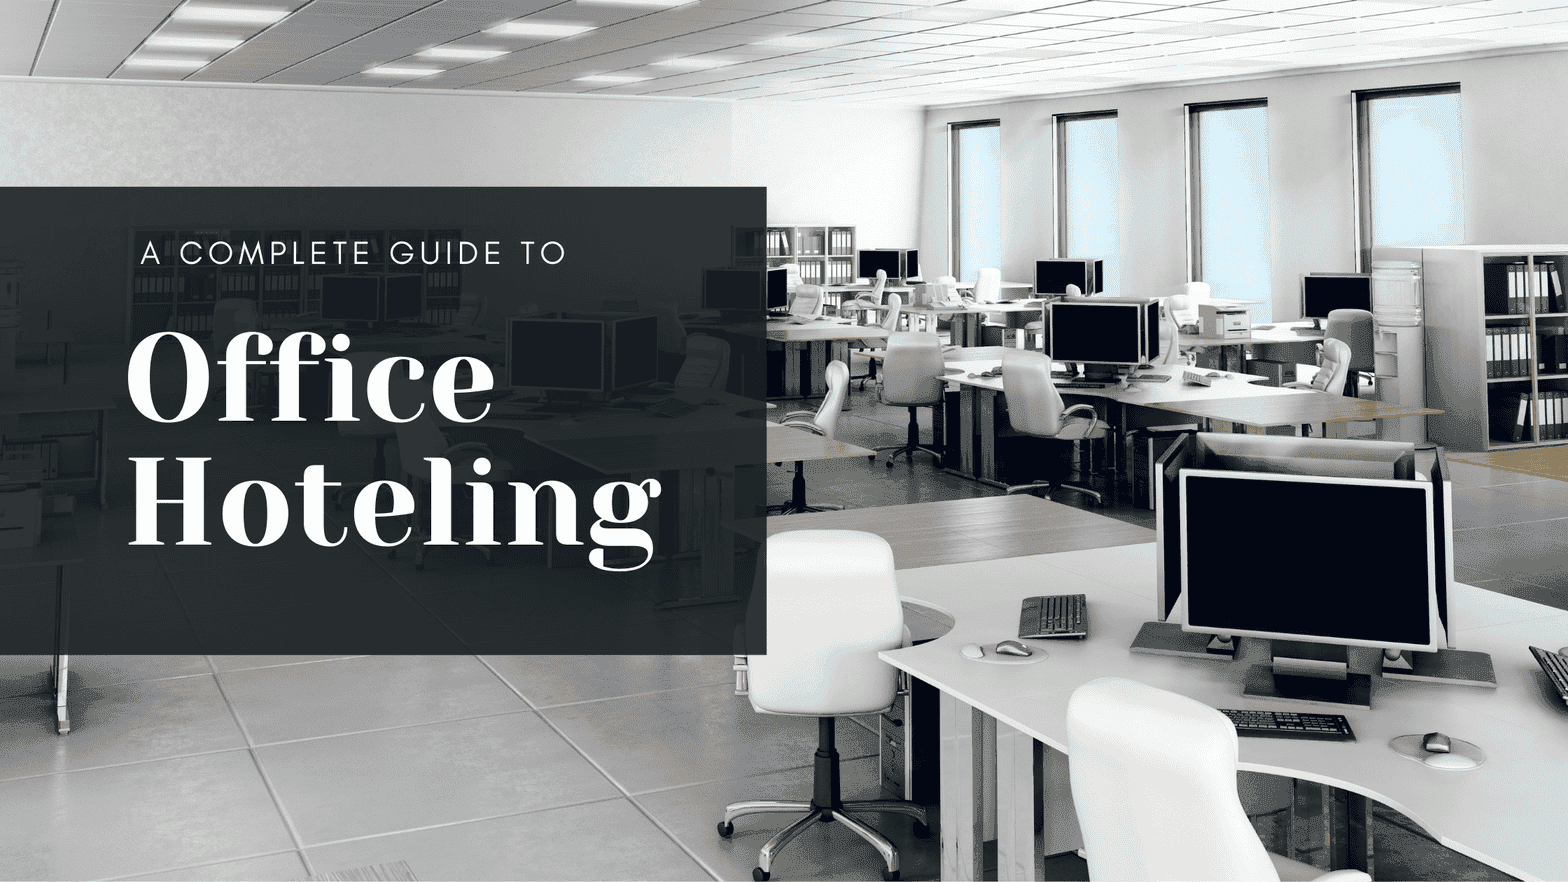 Office Hoteling: A Guide to Hoteling Office Space